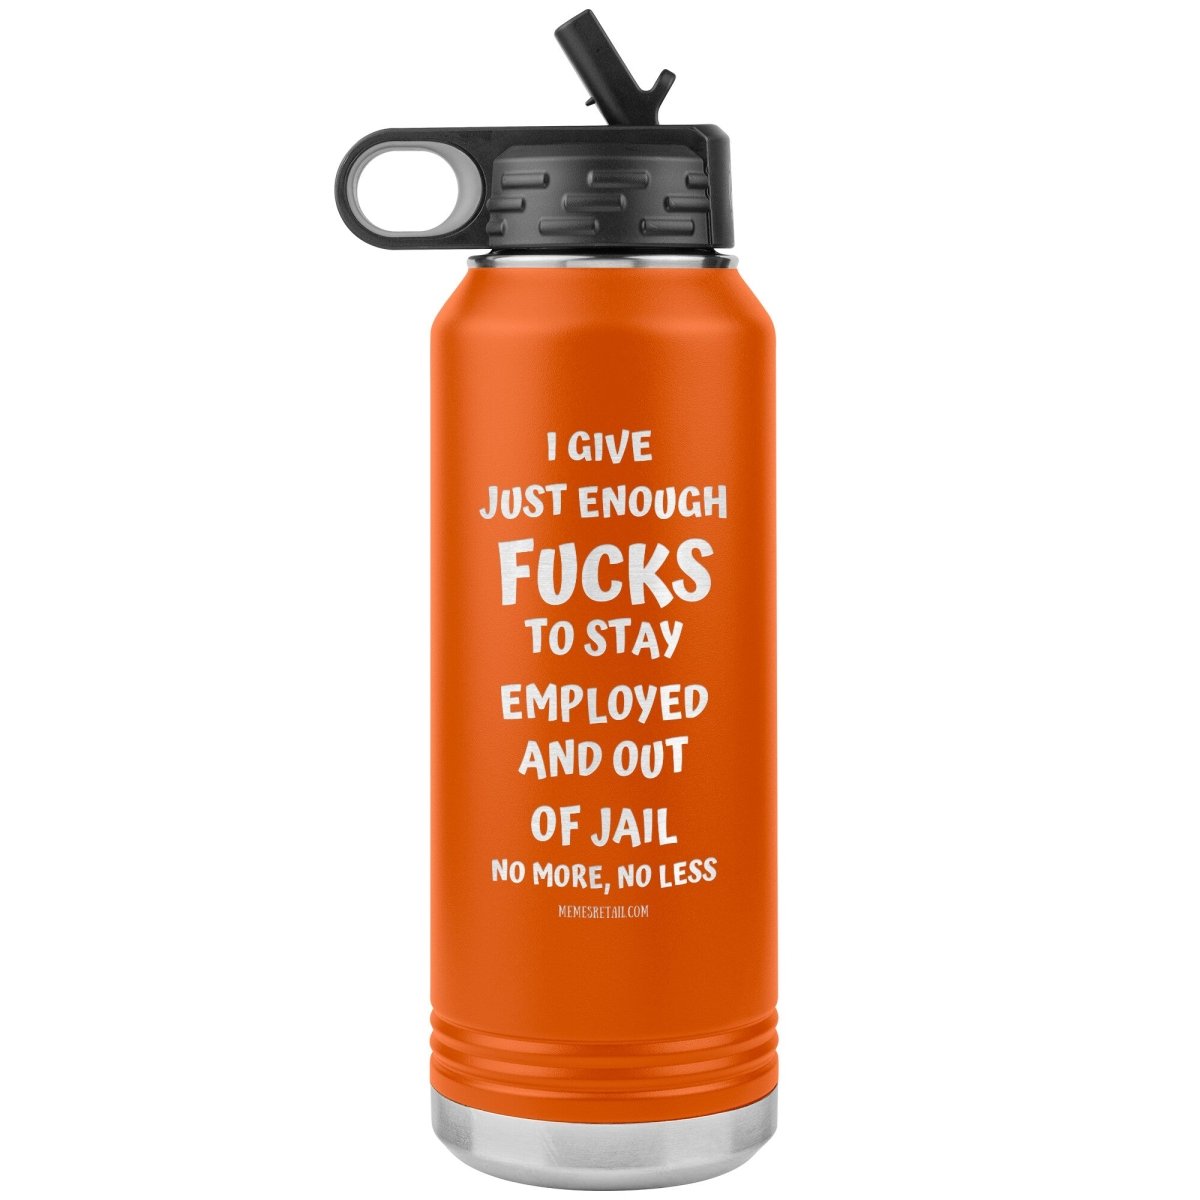 I Give Just Enough Fucks To Stay Employed And Out Of Jail, No More, No Less 32 Oz Water Bottle Tumbler, Orange - MemesRetail.com